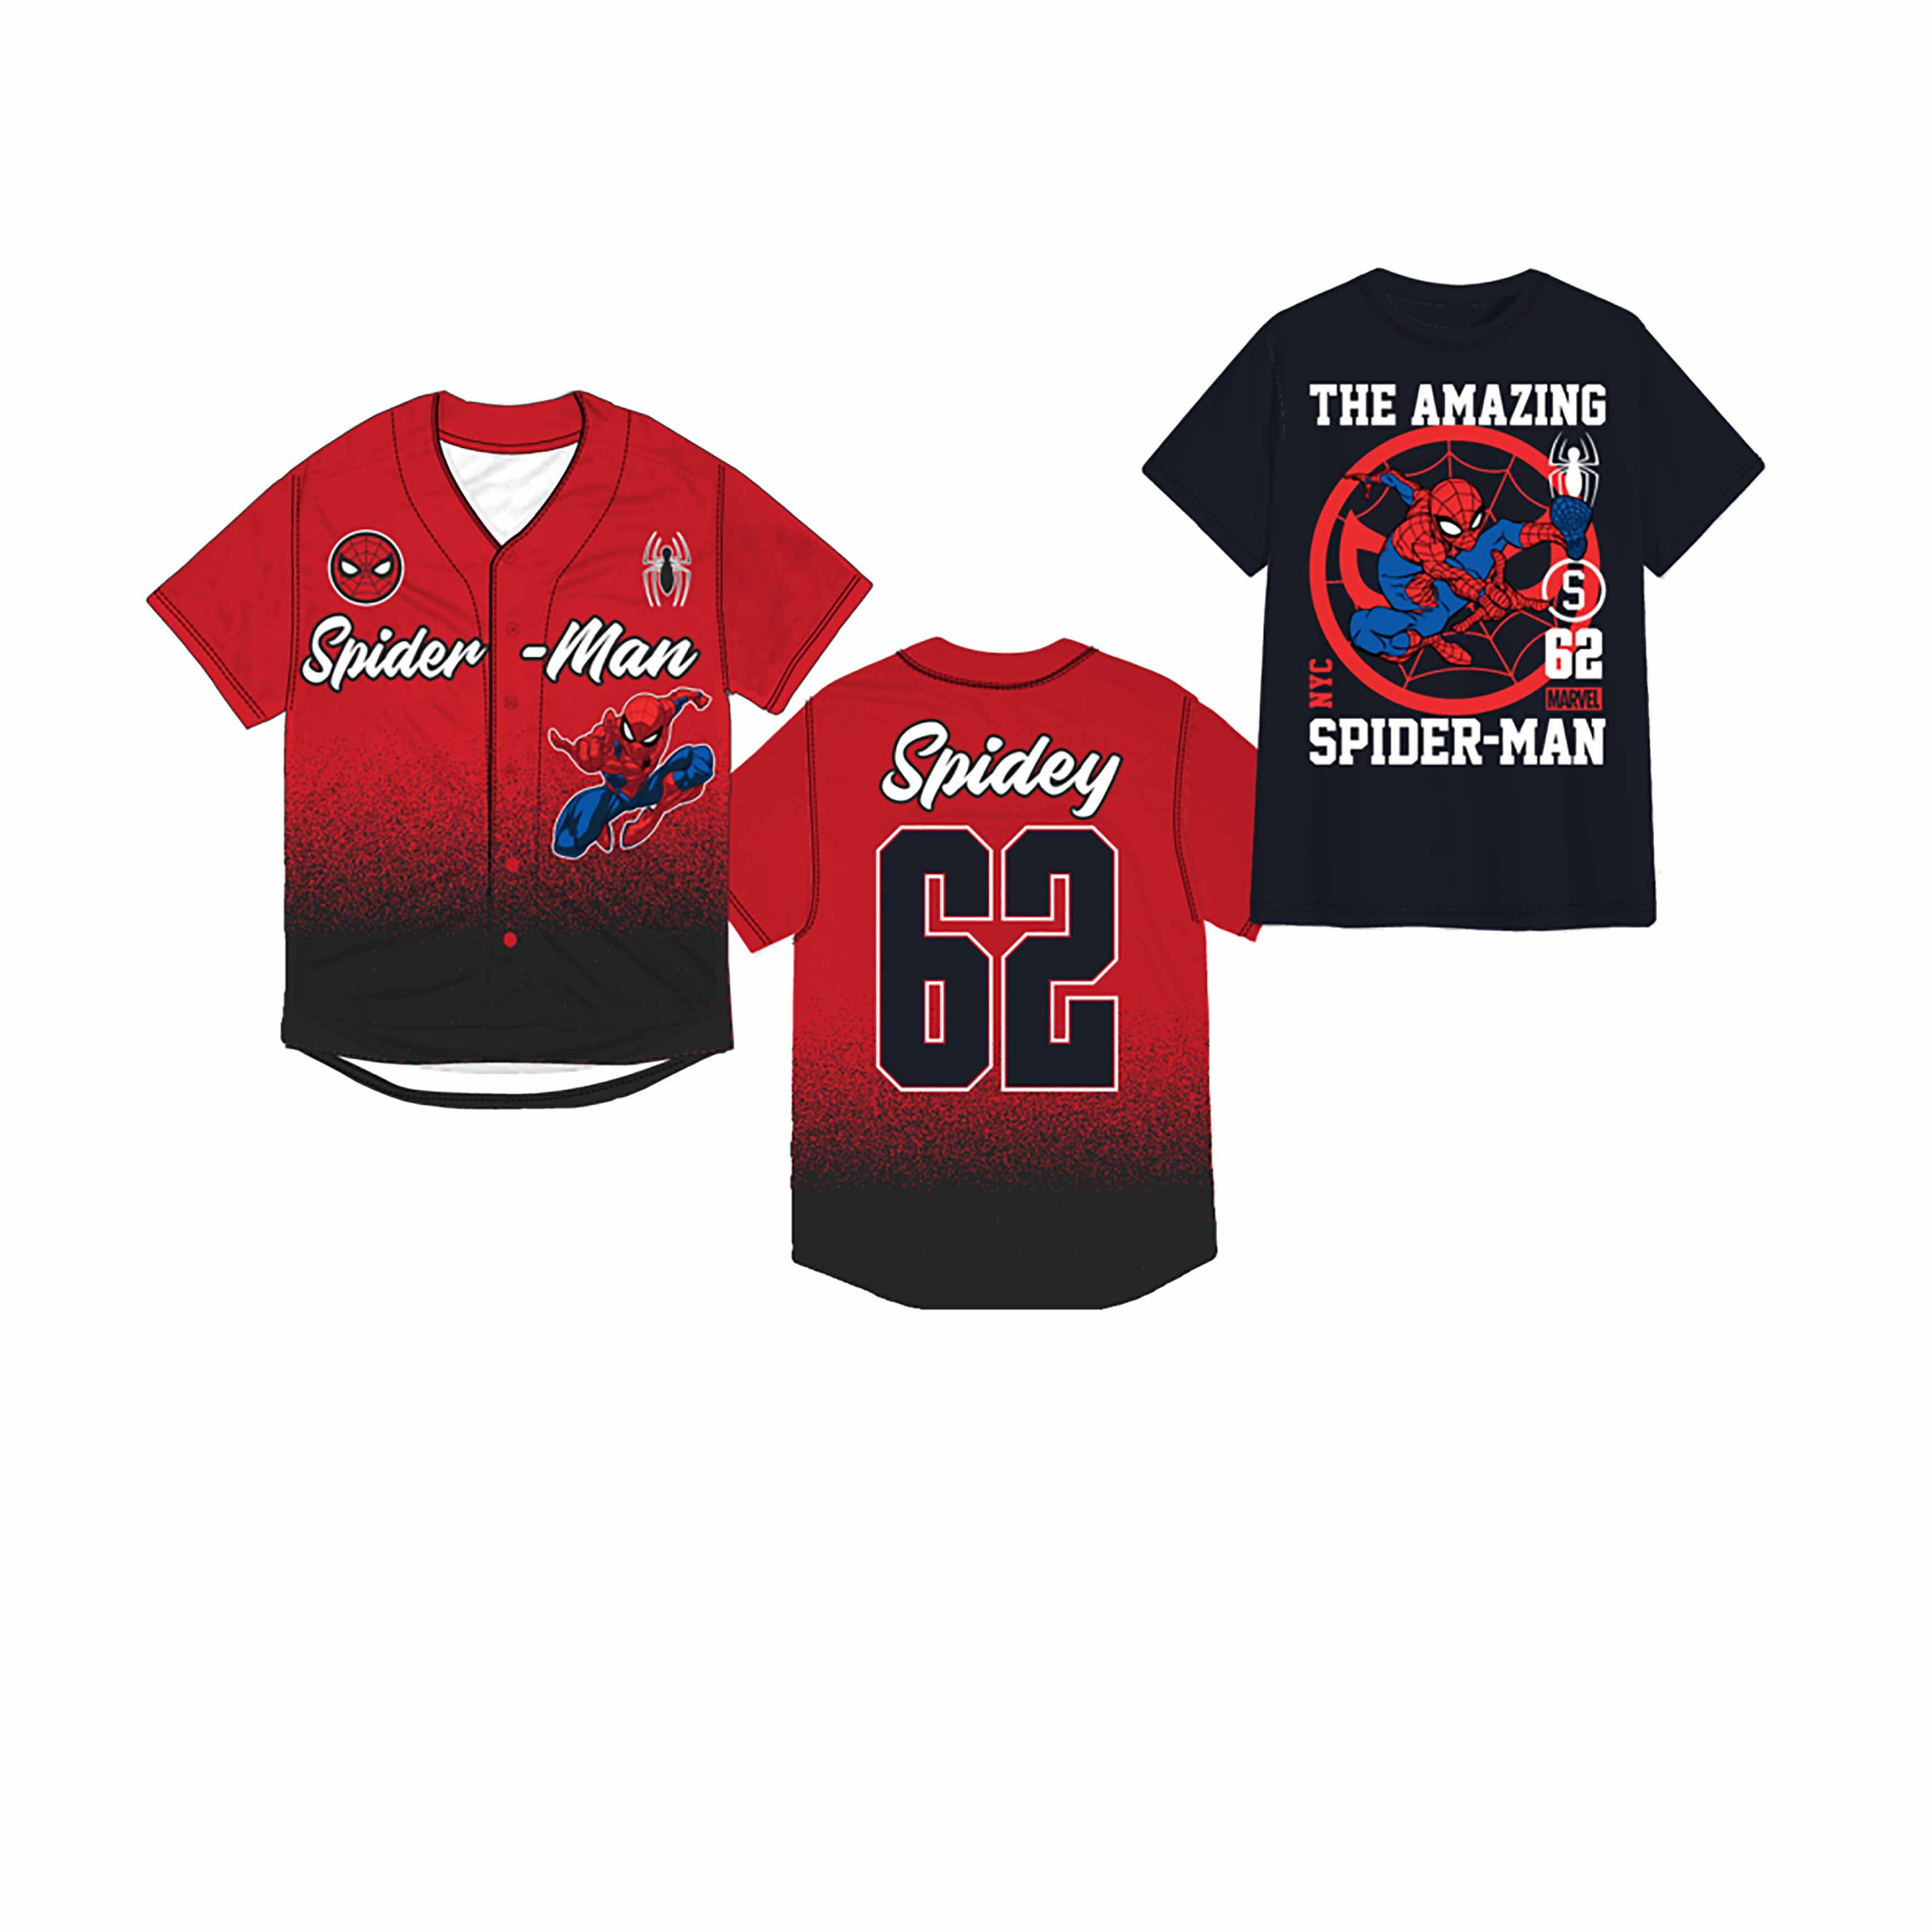 Spider-Man Men's Baseball Jersey Top and Mask